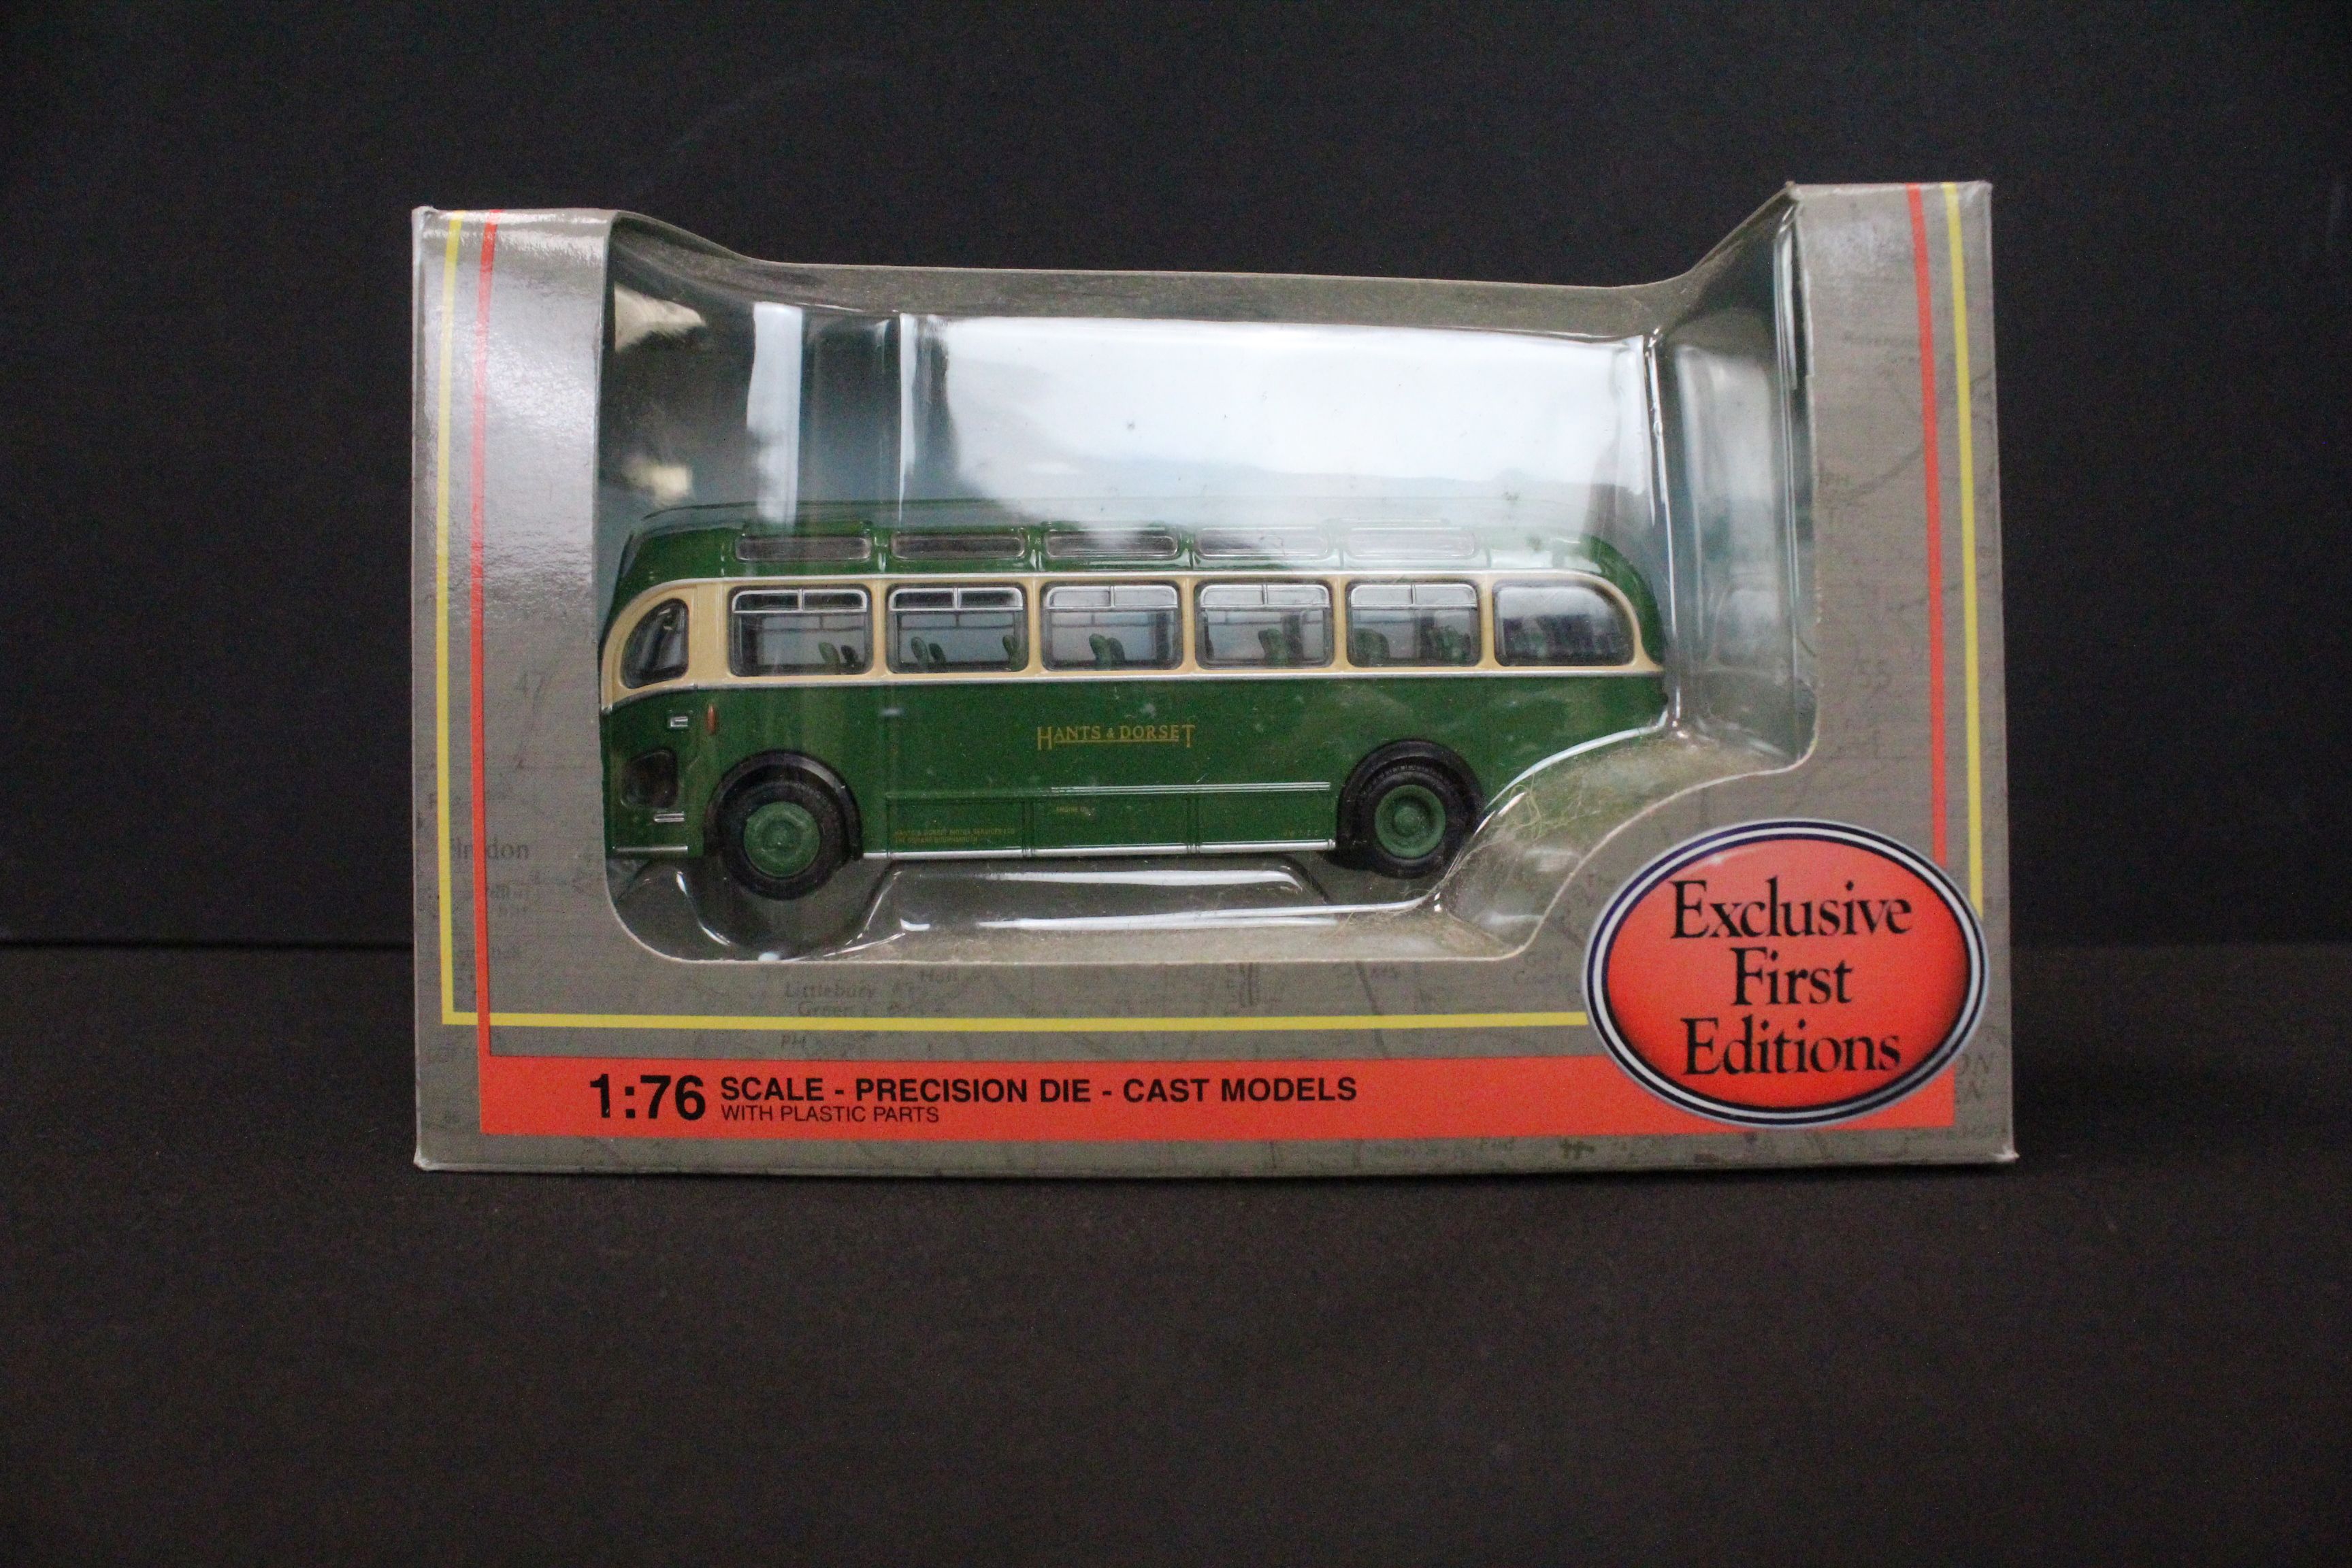 29 Boxed EFE Exclusive First Editions diecast model buses, diecast ex, boxes gd to vg overall - Image 7 of 8